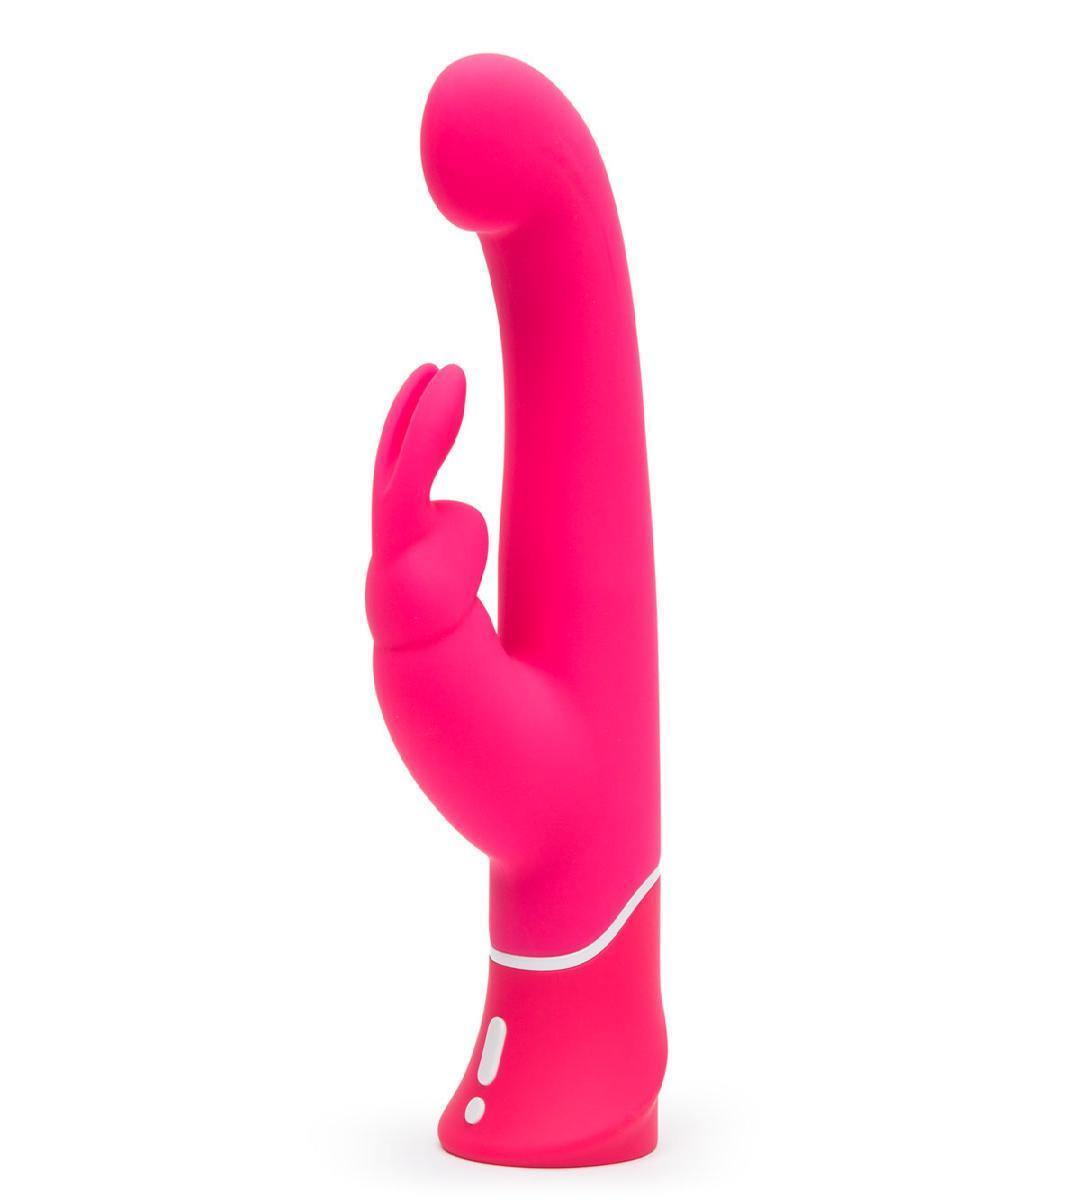 Happy Rabbit Classic Pink G-Spot - Buy At Luxury Toy X - Free 3-Day Shipping